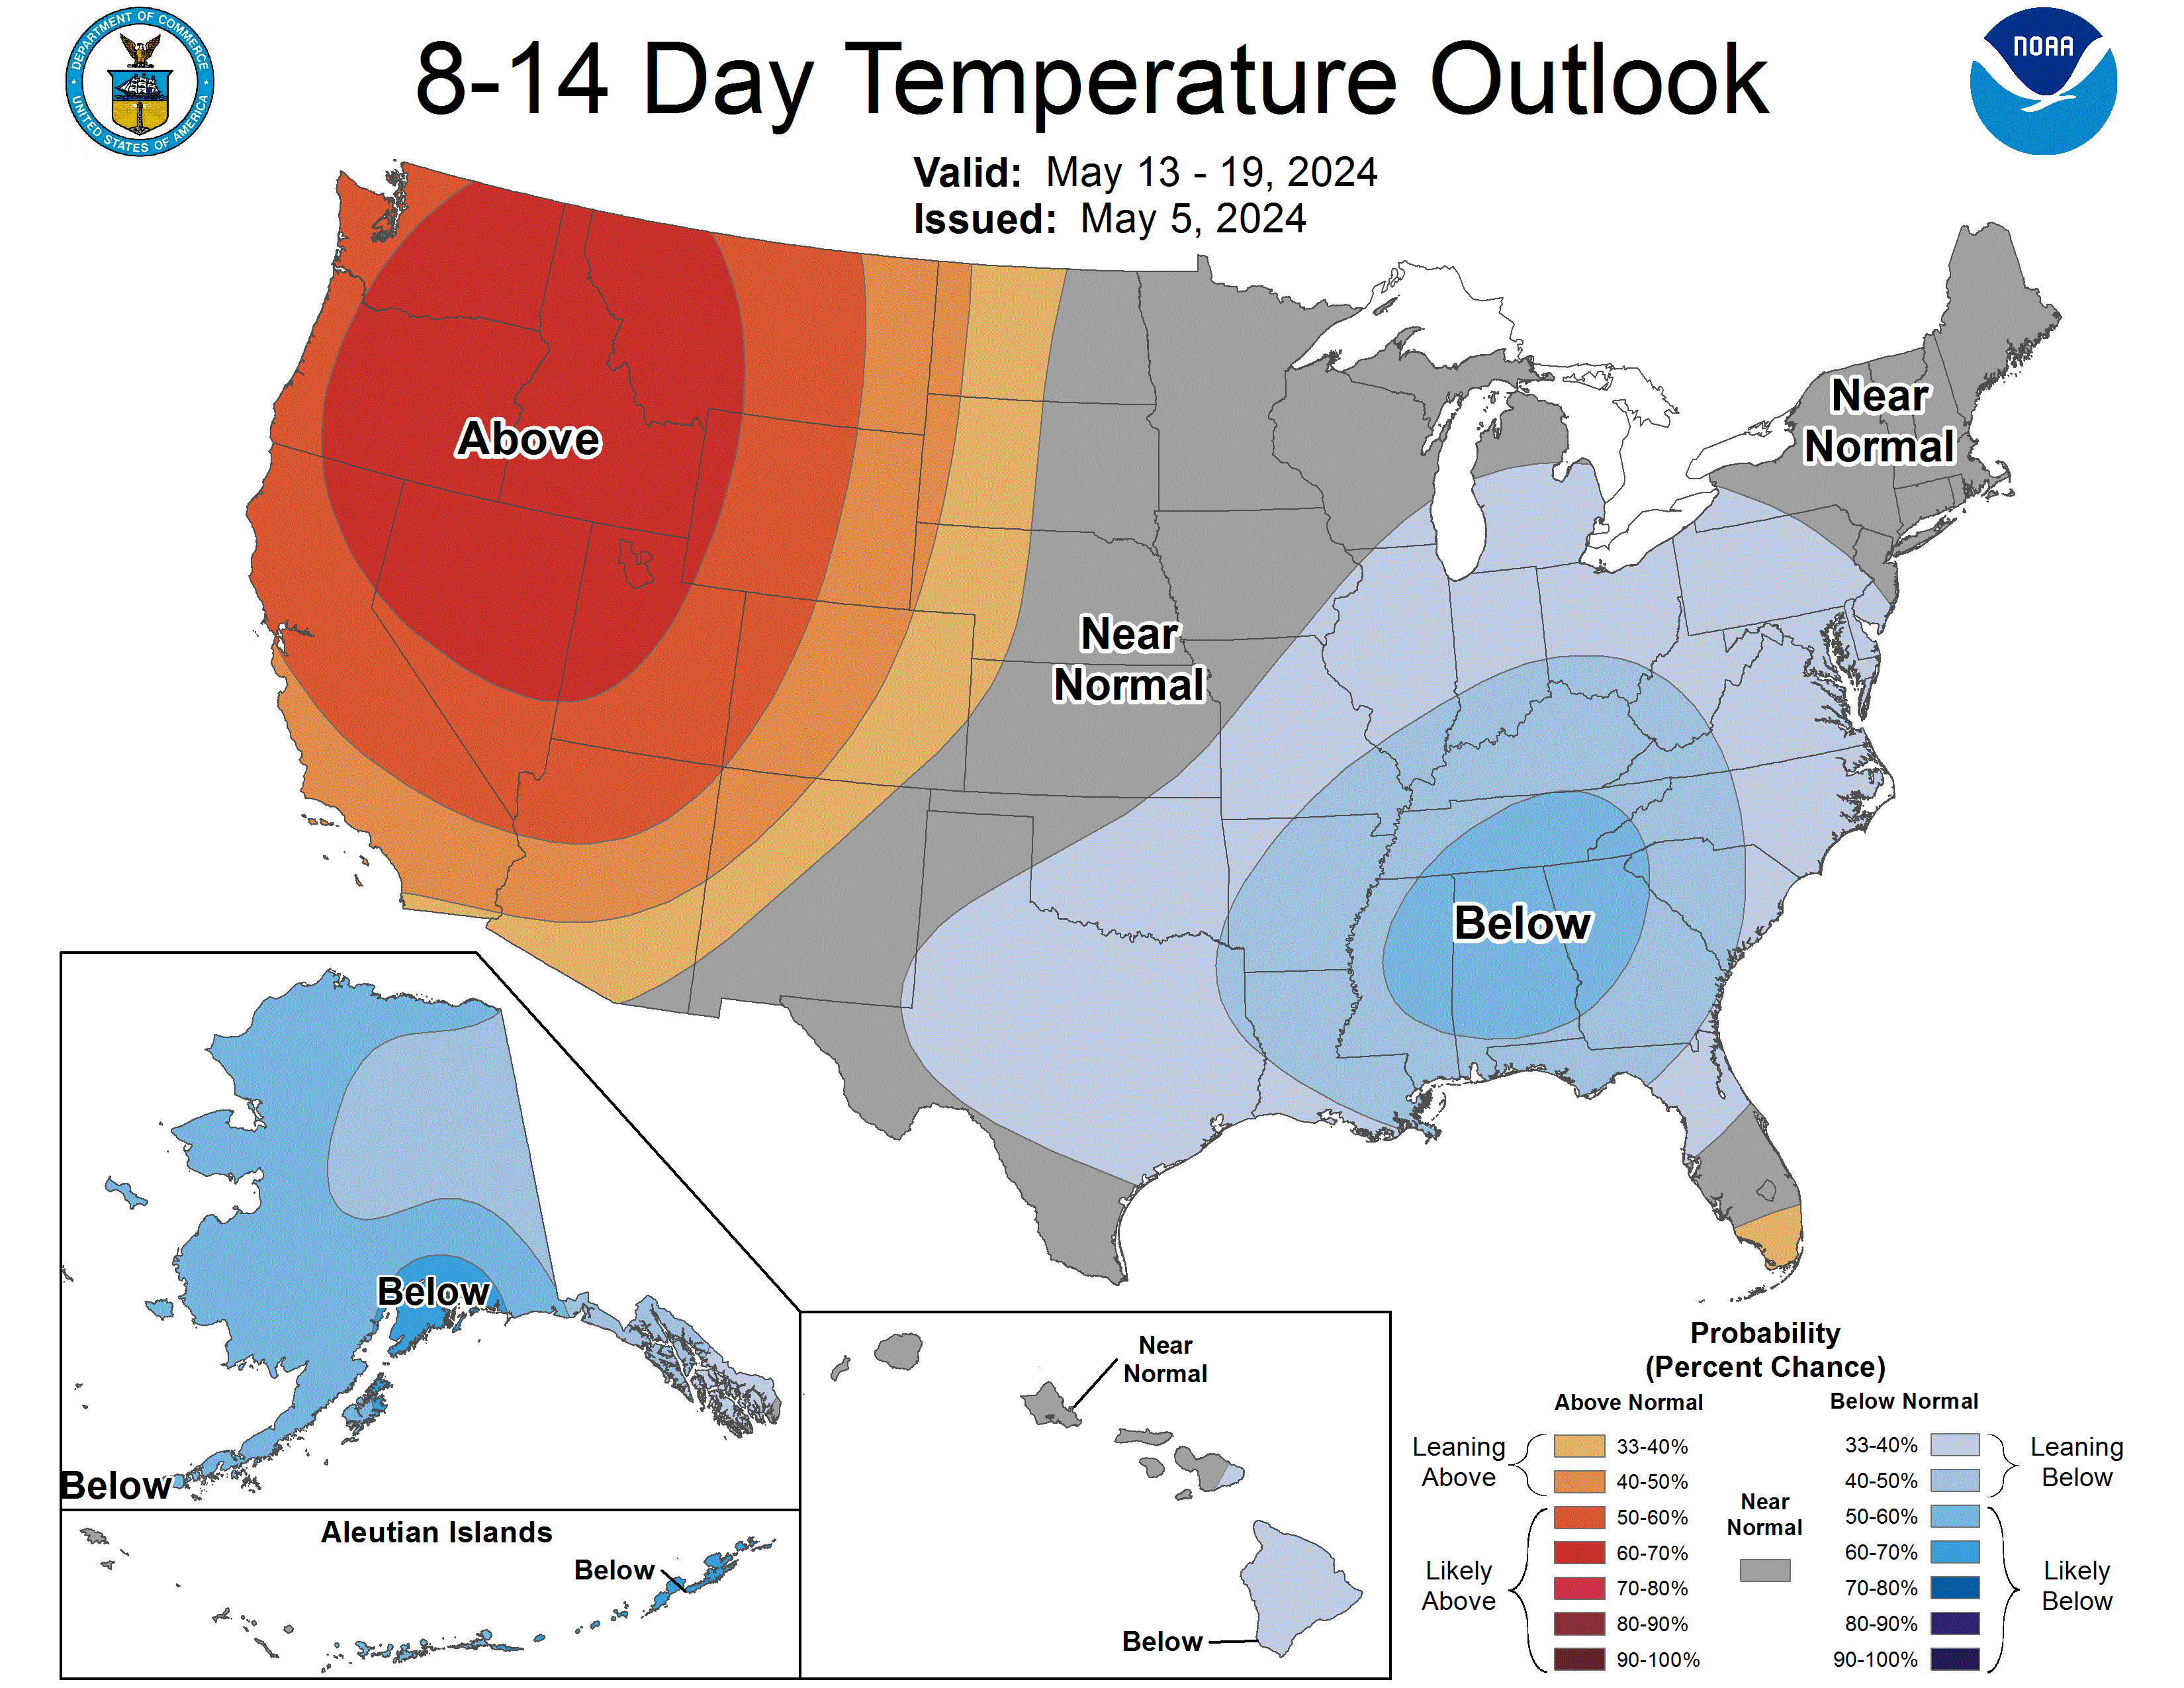 8-14 Day Outlook Temperature